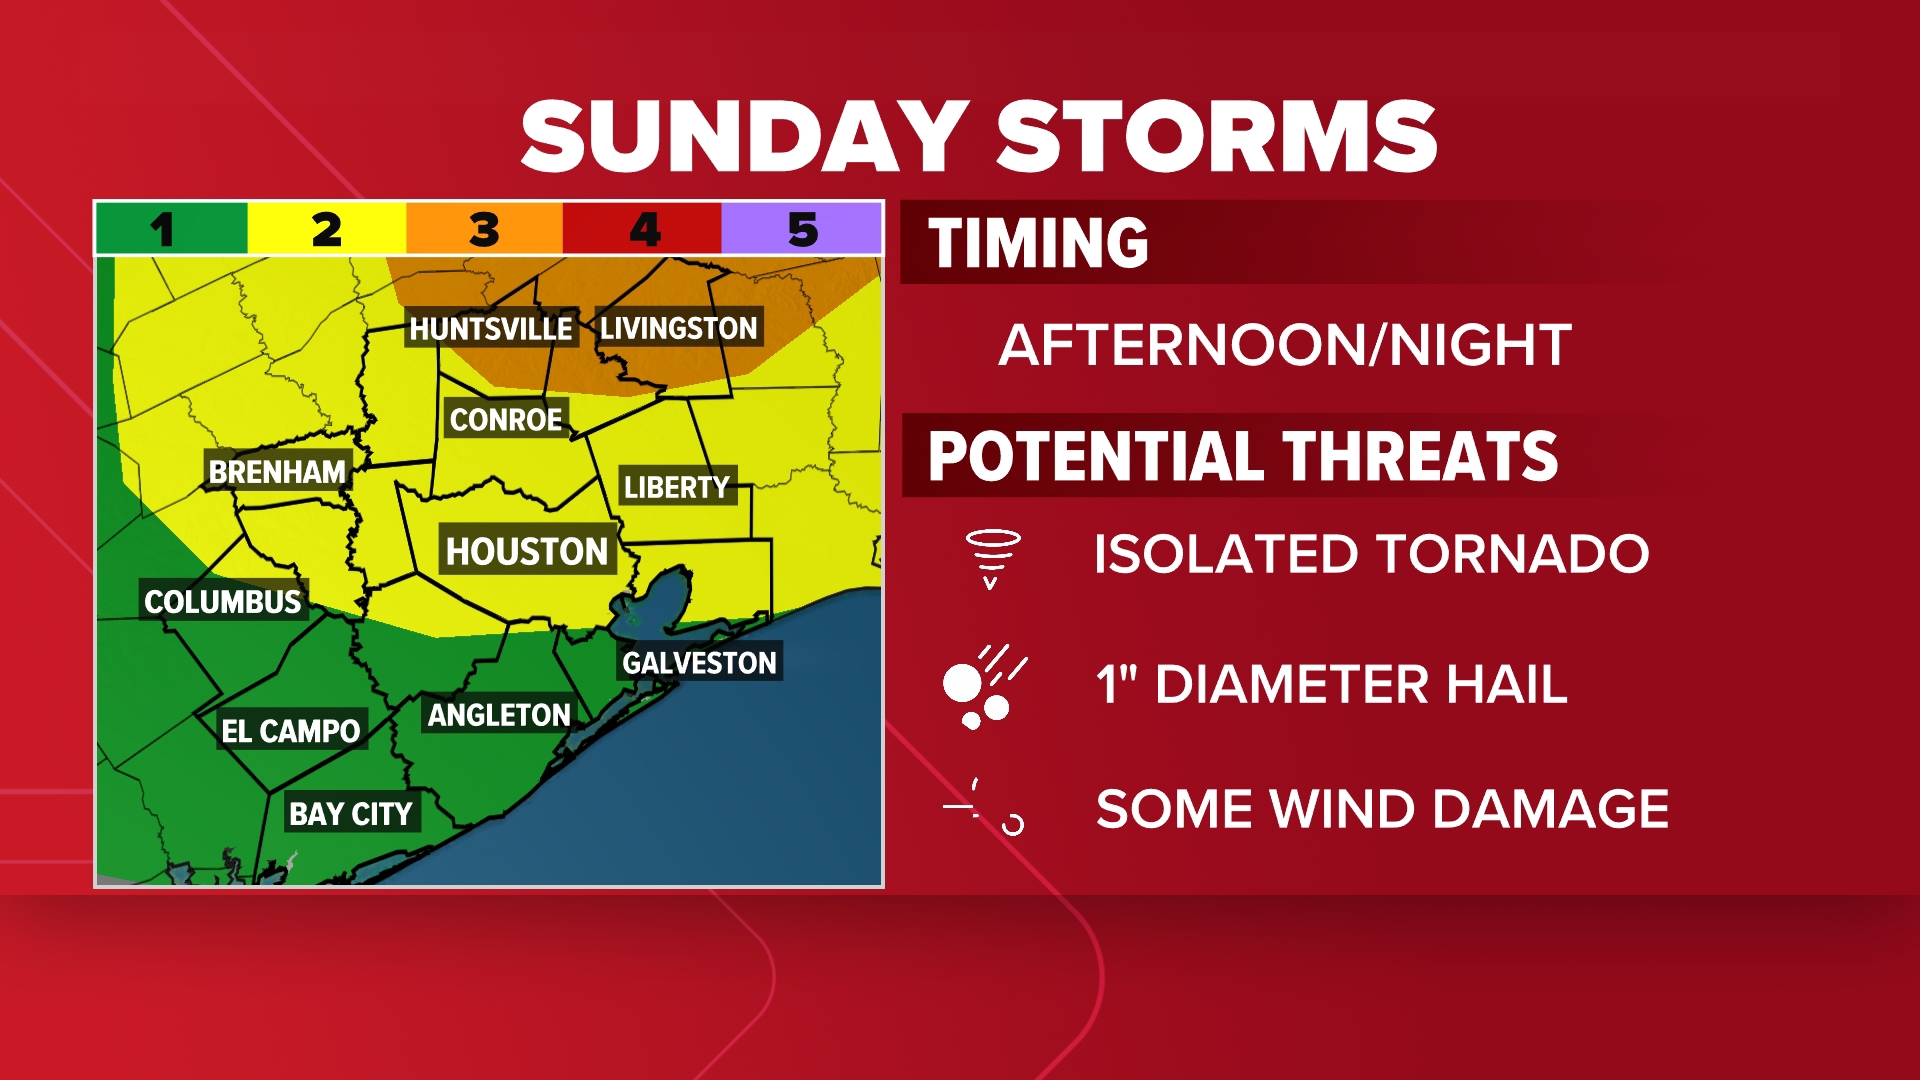 Scattered storms are possible across the Houston area on Sunday, some of which may be strong to severe.